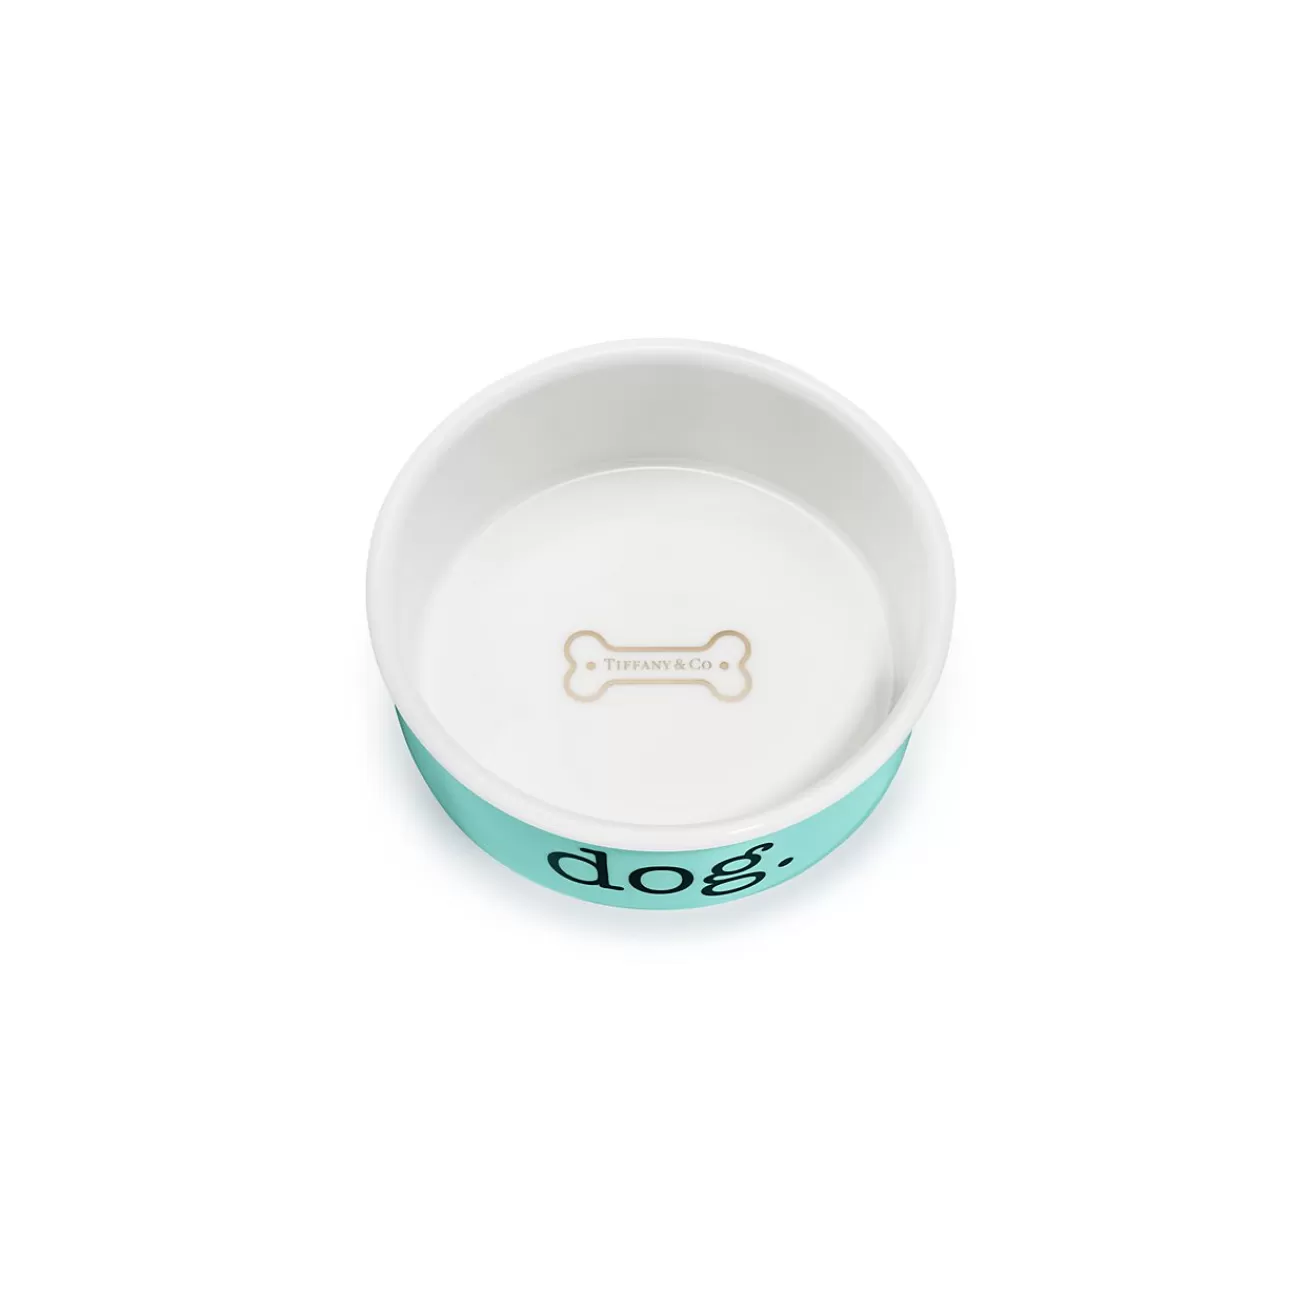 Tiffany & Co. Dog bowl in bone china, extra small. | ^ Stationery, Games & Unique Objects | Games & Novelties